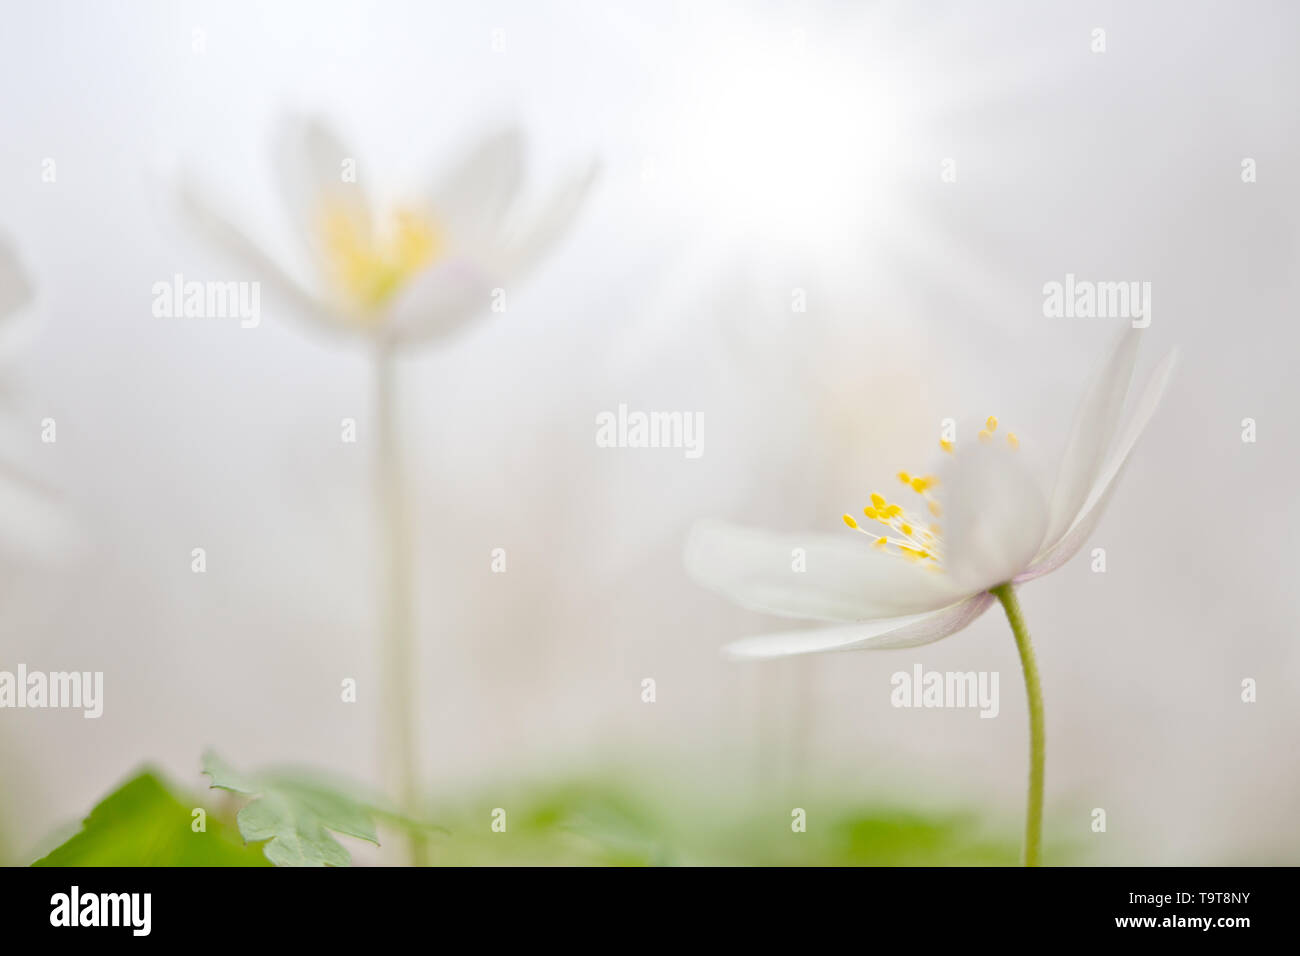 White wild flower, Anemone nemerosa or wood anemone. Soft focus image with blurred dreamy background. Stock Photo